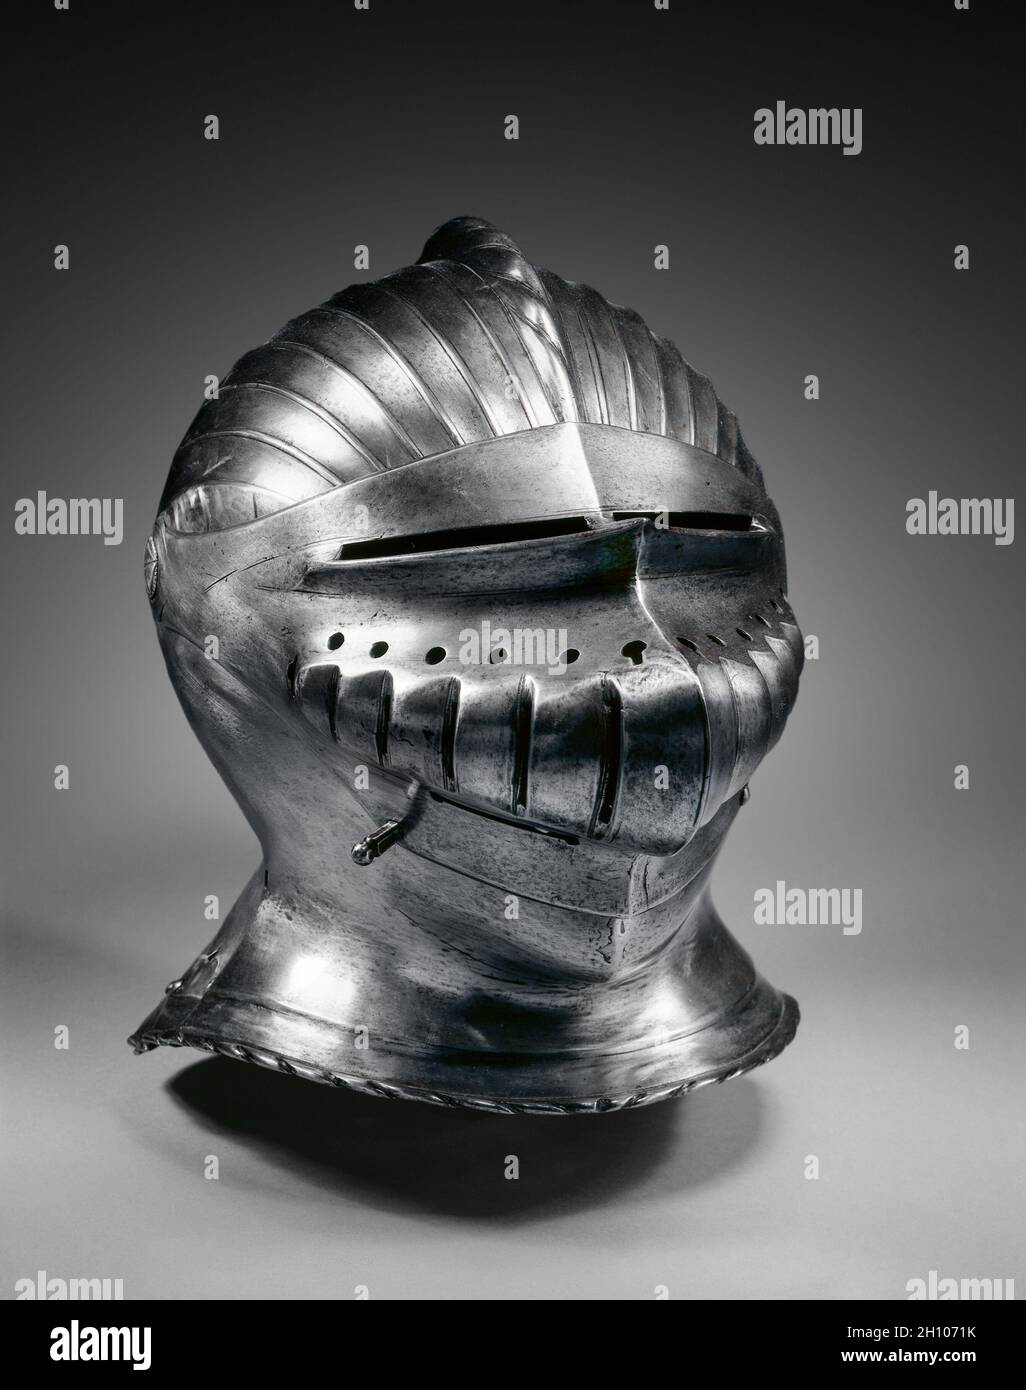 Close Helmet in Maximilian Style, c. 1510–30. Germany, Nuremberg(?), 16th century. Steel, brass rivets; overall: 29.2 x 34.9 x 23.5 cm (11 1/2 x 13 3/4 x 9 1/4 in.).  Distinguished by its regularly fluted surfaces, armor in this style was popularized in South Germany during the early 1500s. The style is usually called 'Maximilian,' as it was introduced during the reign of Emperor Maximilian I (1493-1519). The style reflects male costume of the period and the shift to the new rounded forms of the Renaissance. Other examples of this armor style may be seen nearby. Stock Photo